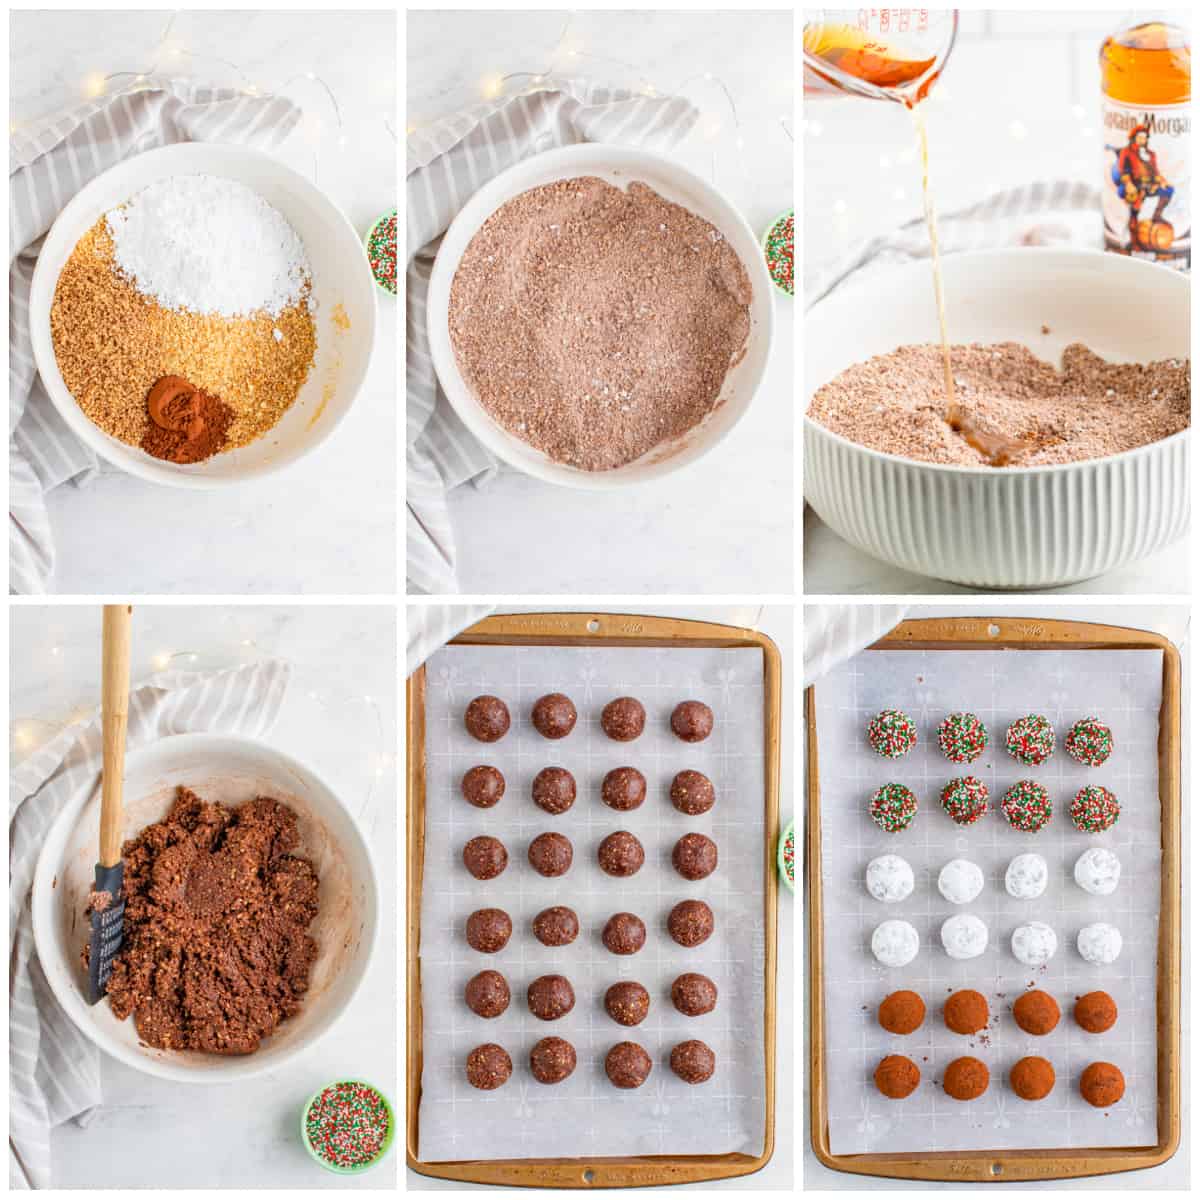 Step by step photos on how to make Rum Balls.